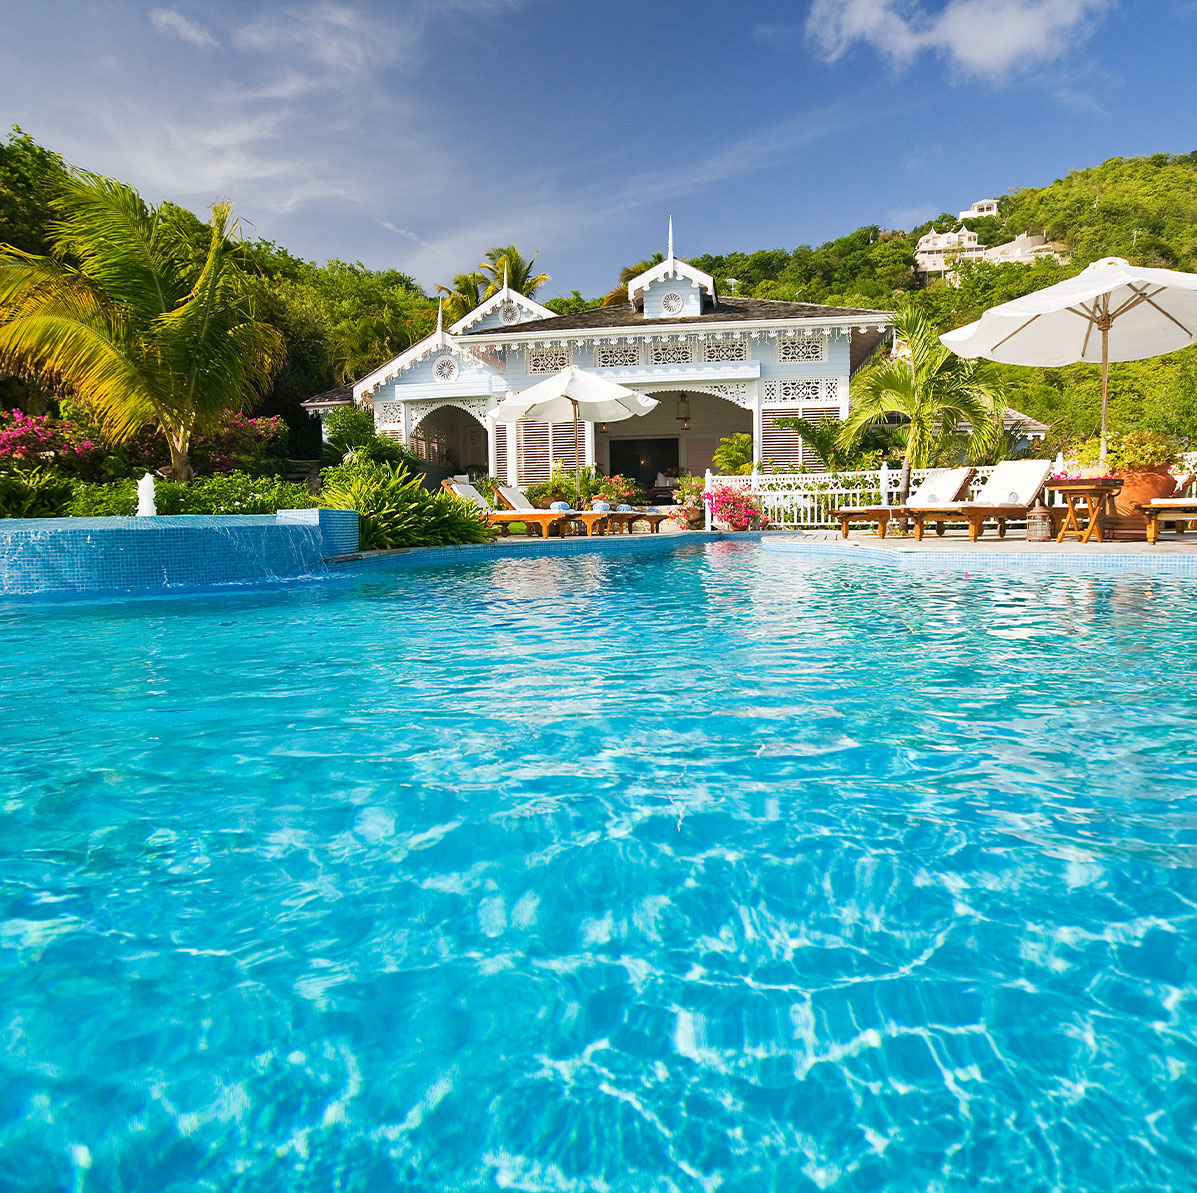 Sparlking deep blue pool in front of Traditional Caribbean Villa